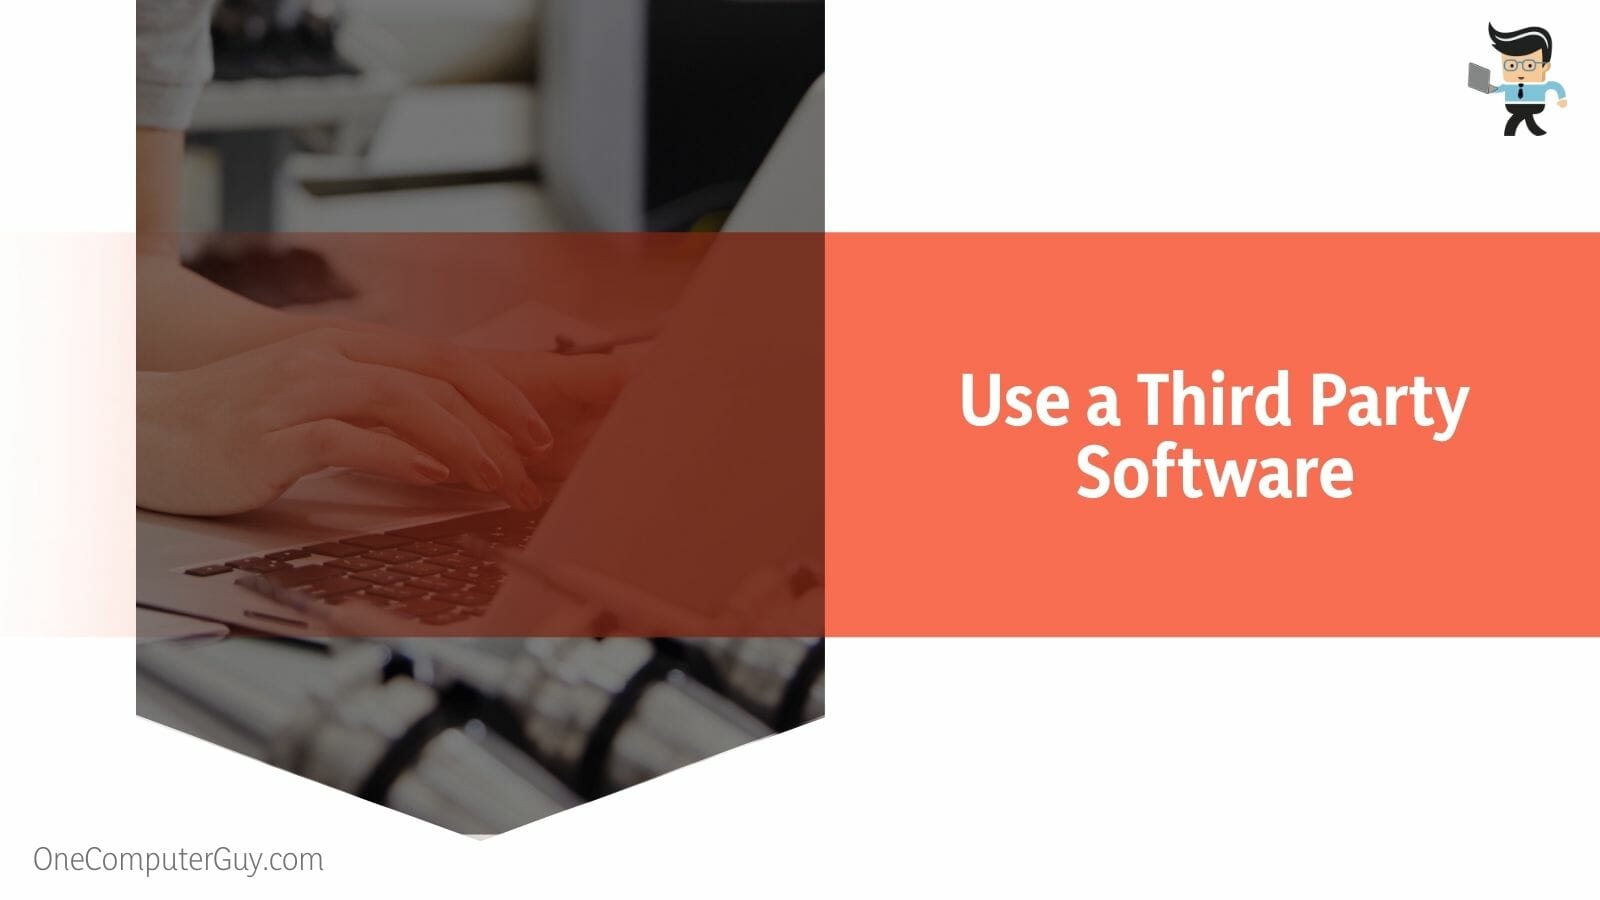 Use a Third Party Software